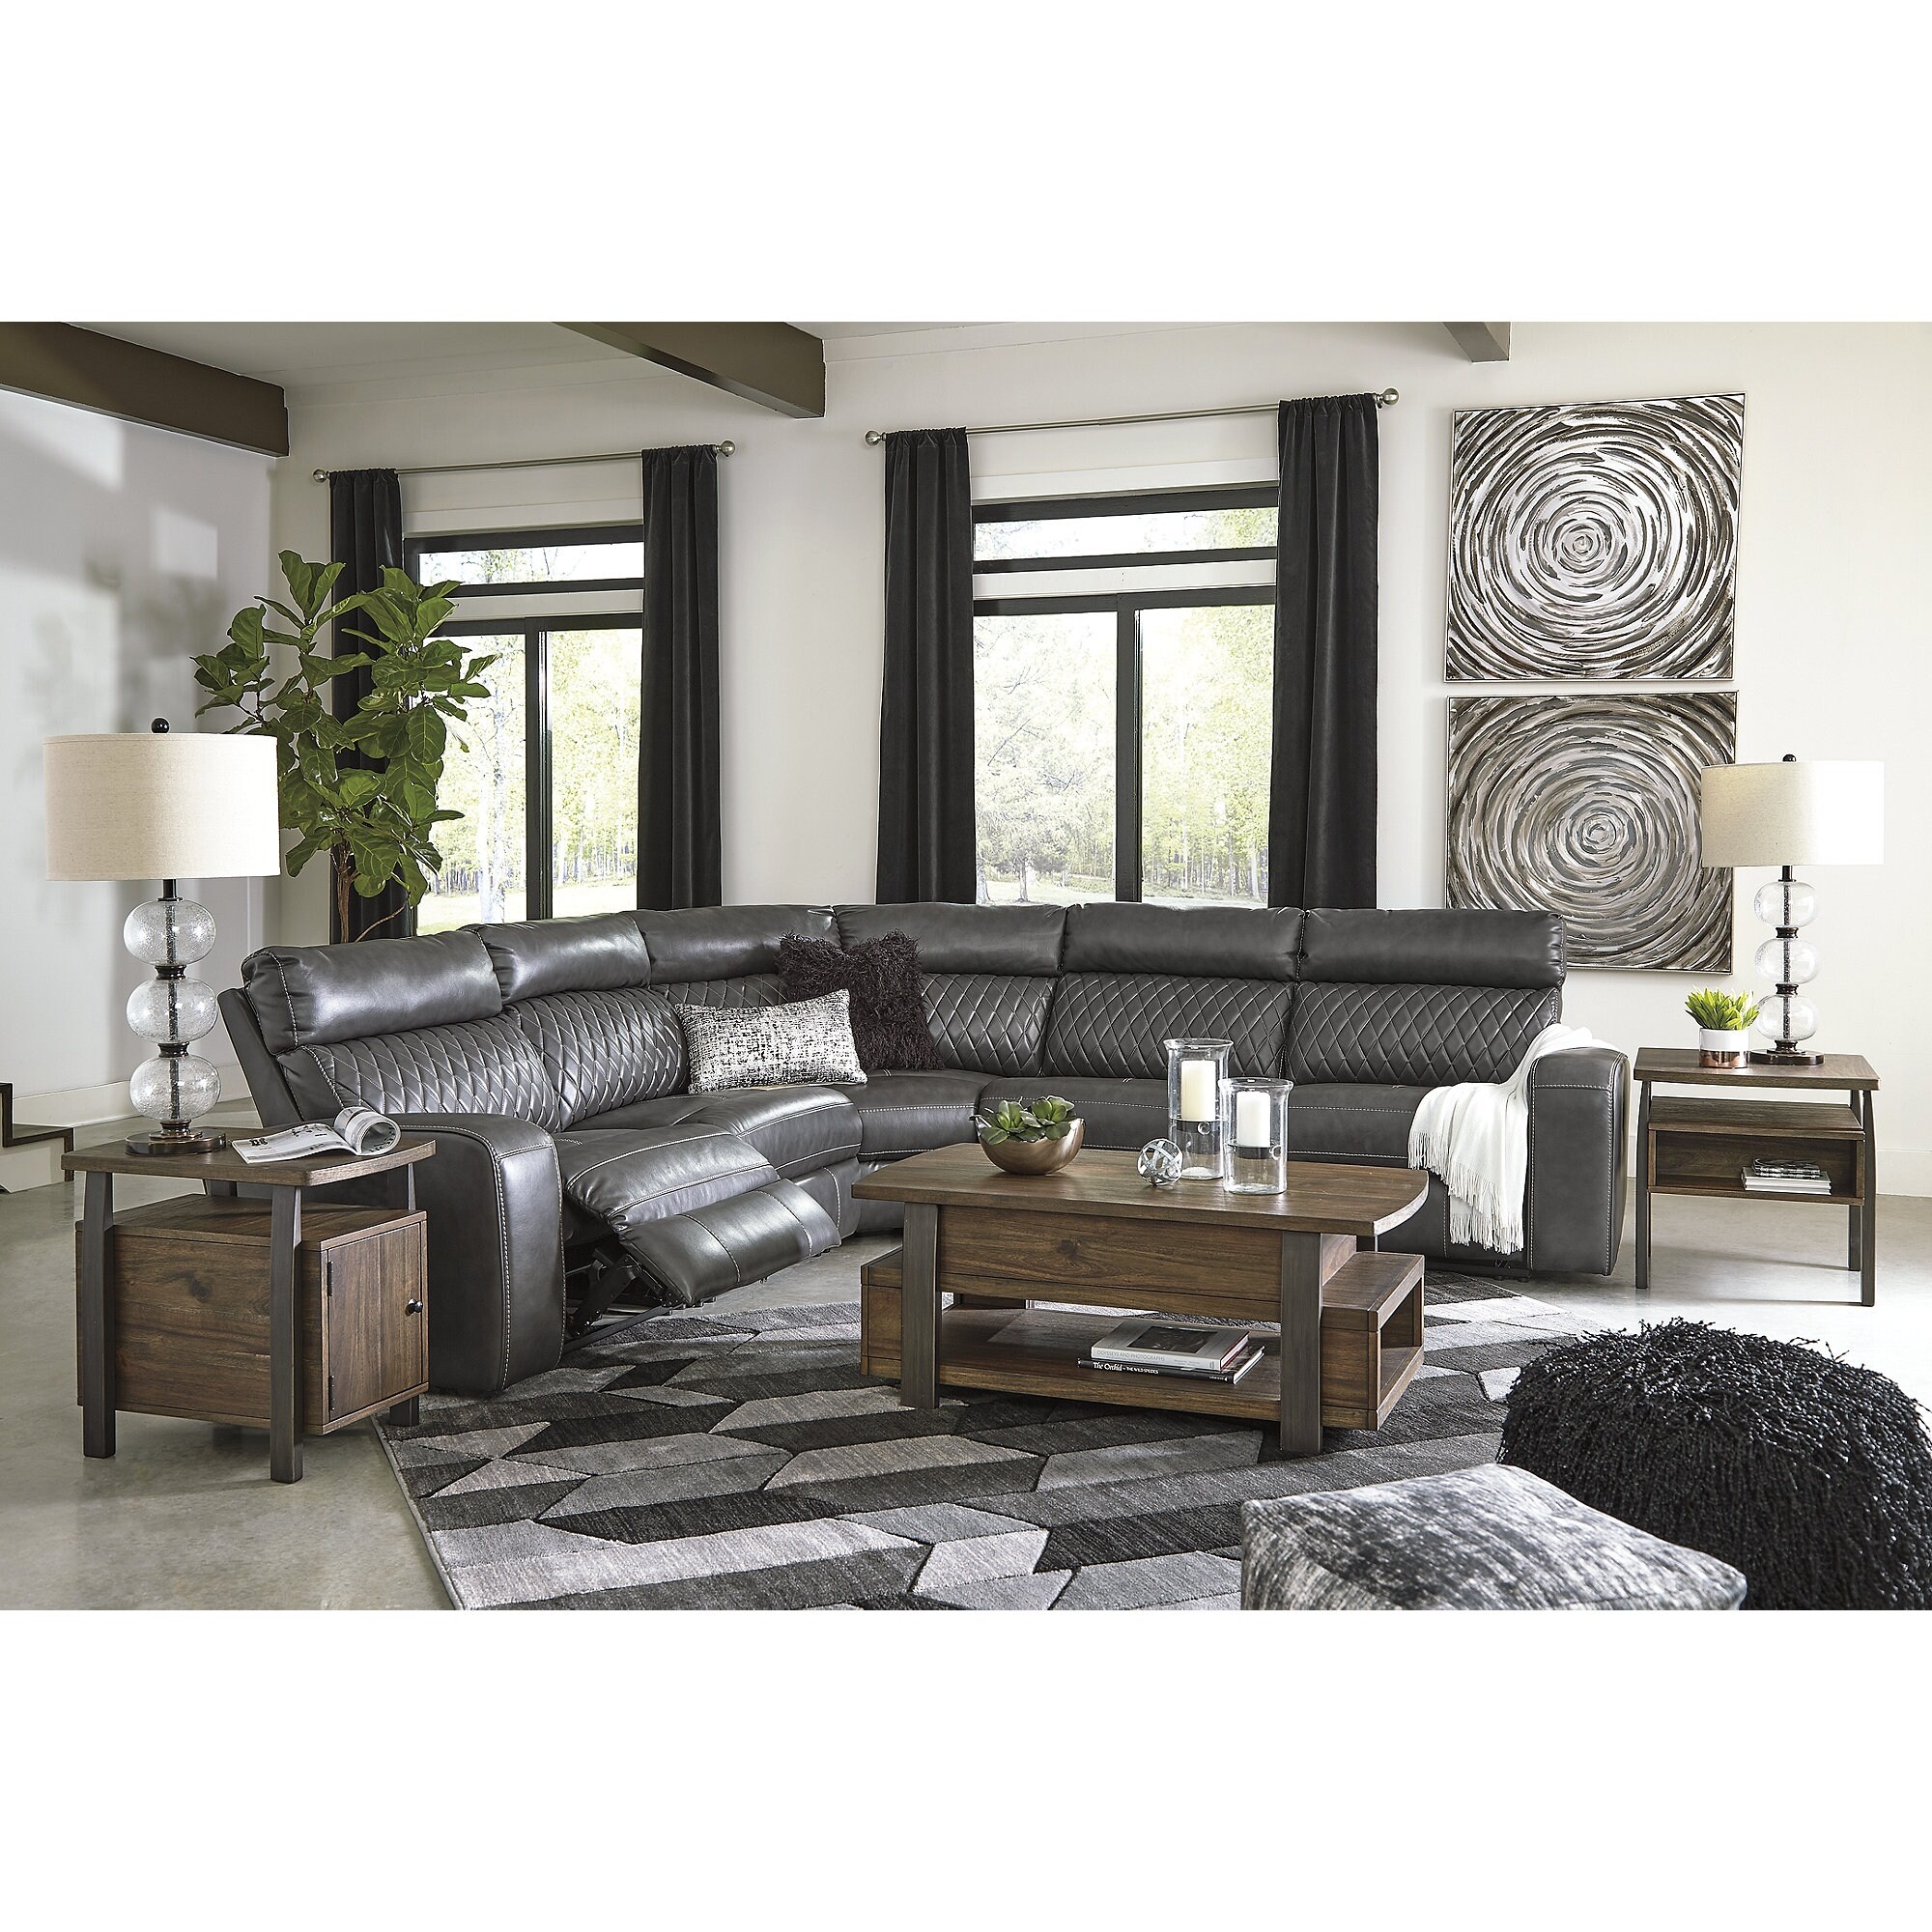 Signature Design by Ashley Samperstone Gray 5-Piece Power Reclining Sectional - 141" W x 141" D x 41" H